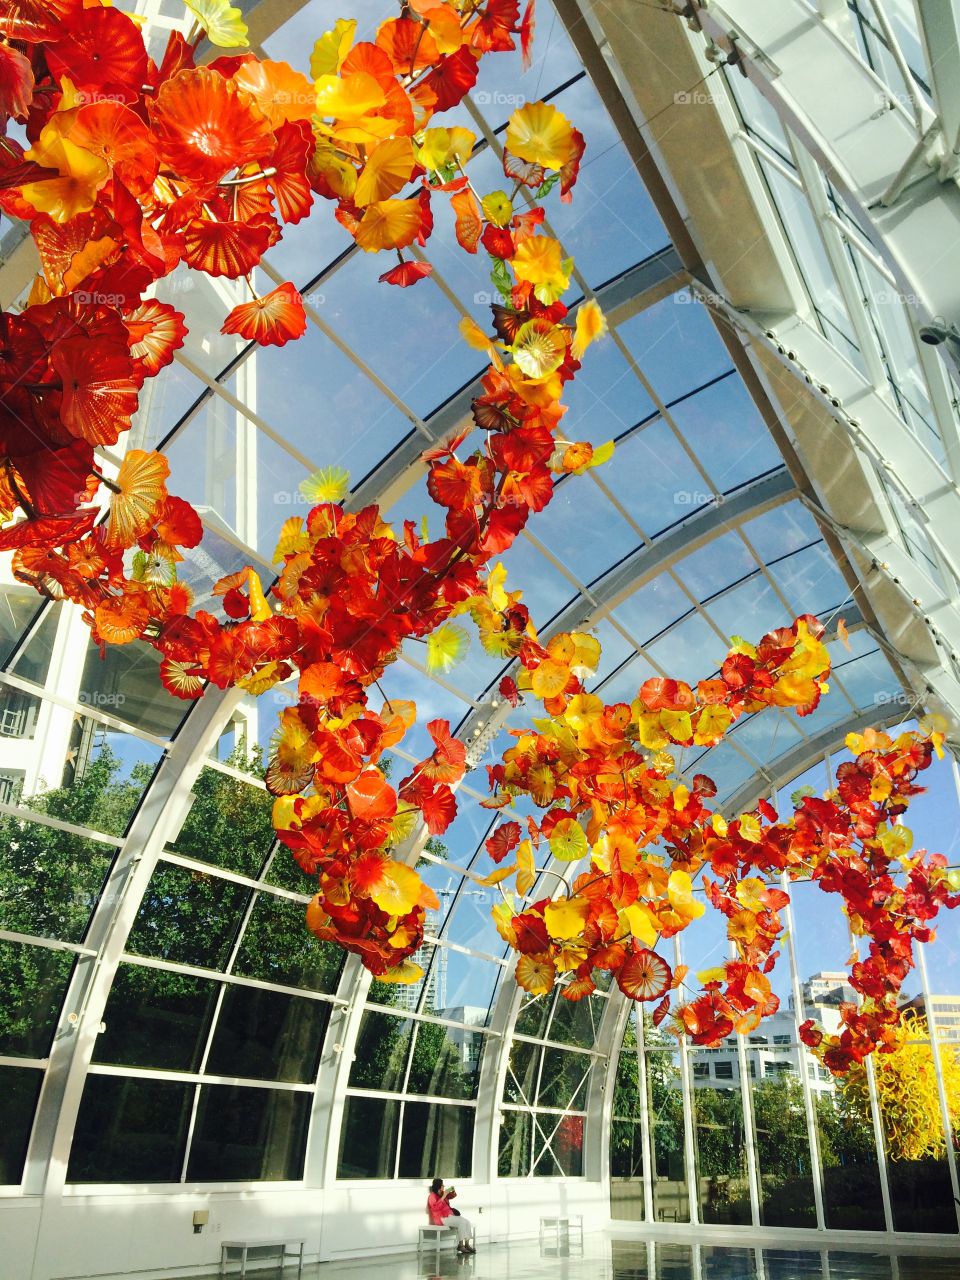 Chihuly Garden and Glass. Capturing some of the beauty of this amazing museum. 